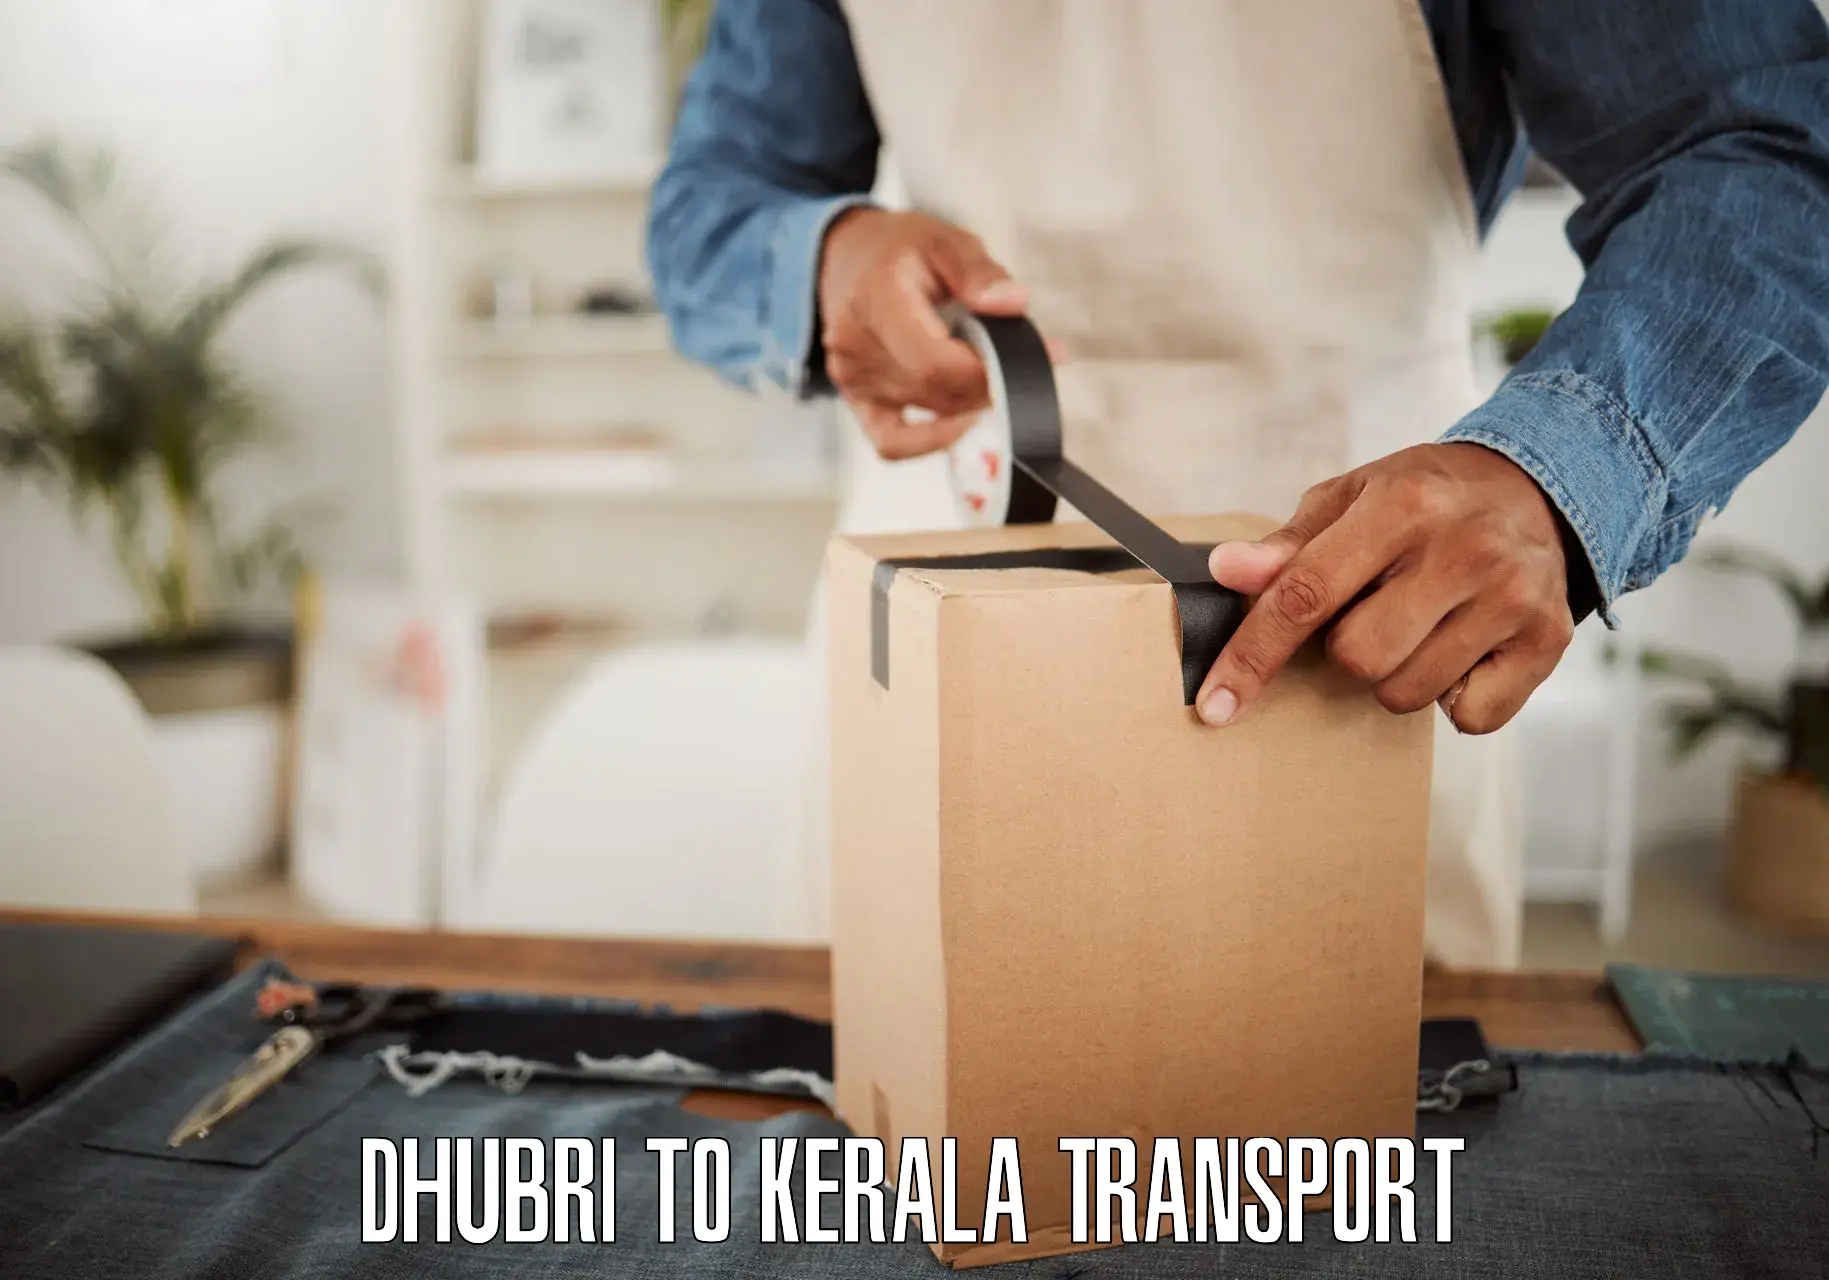 Express transport services Dhubri to Cochin University of Science and Technology